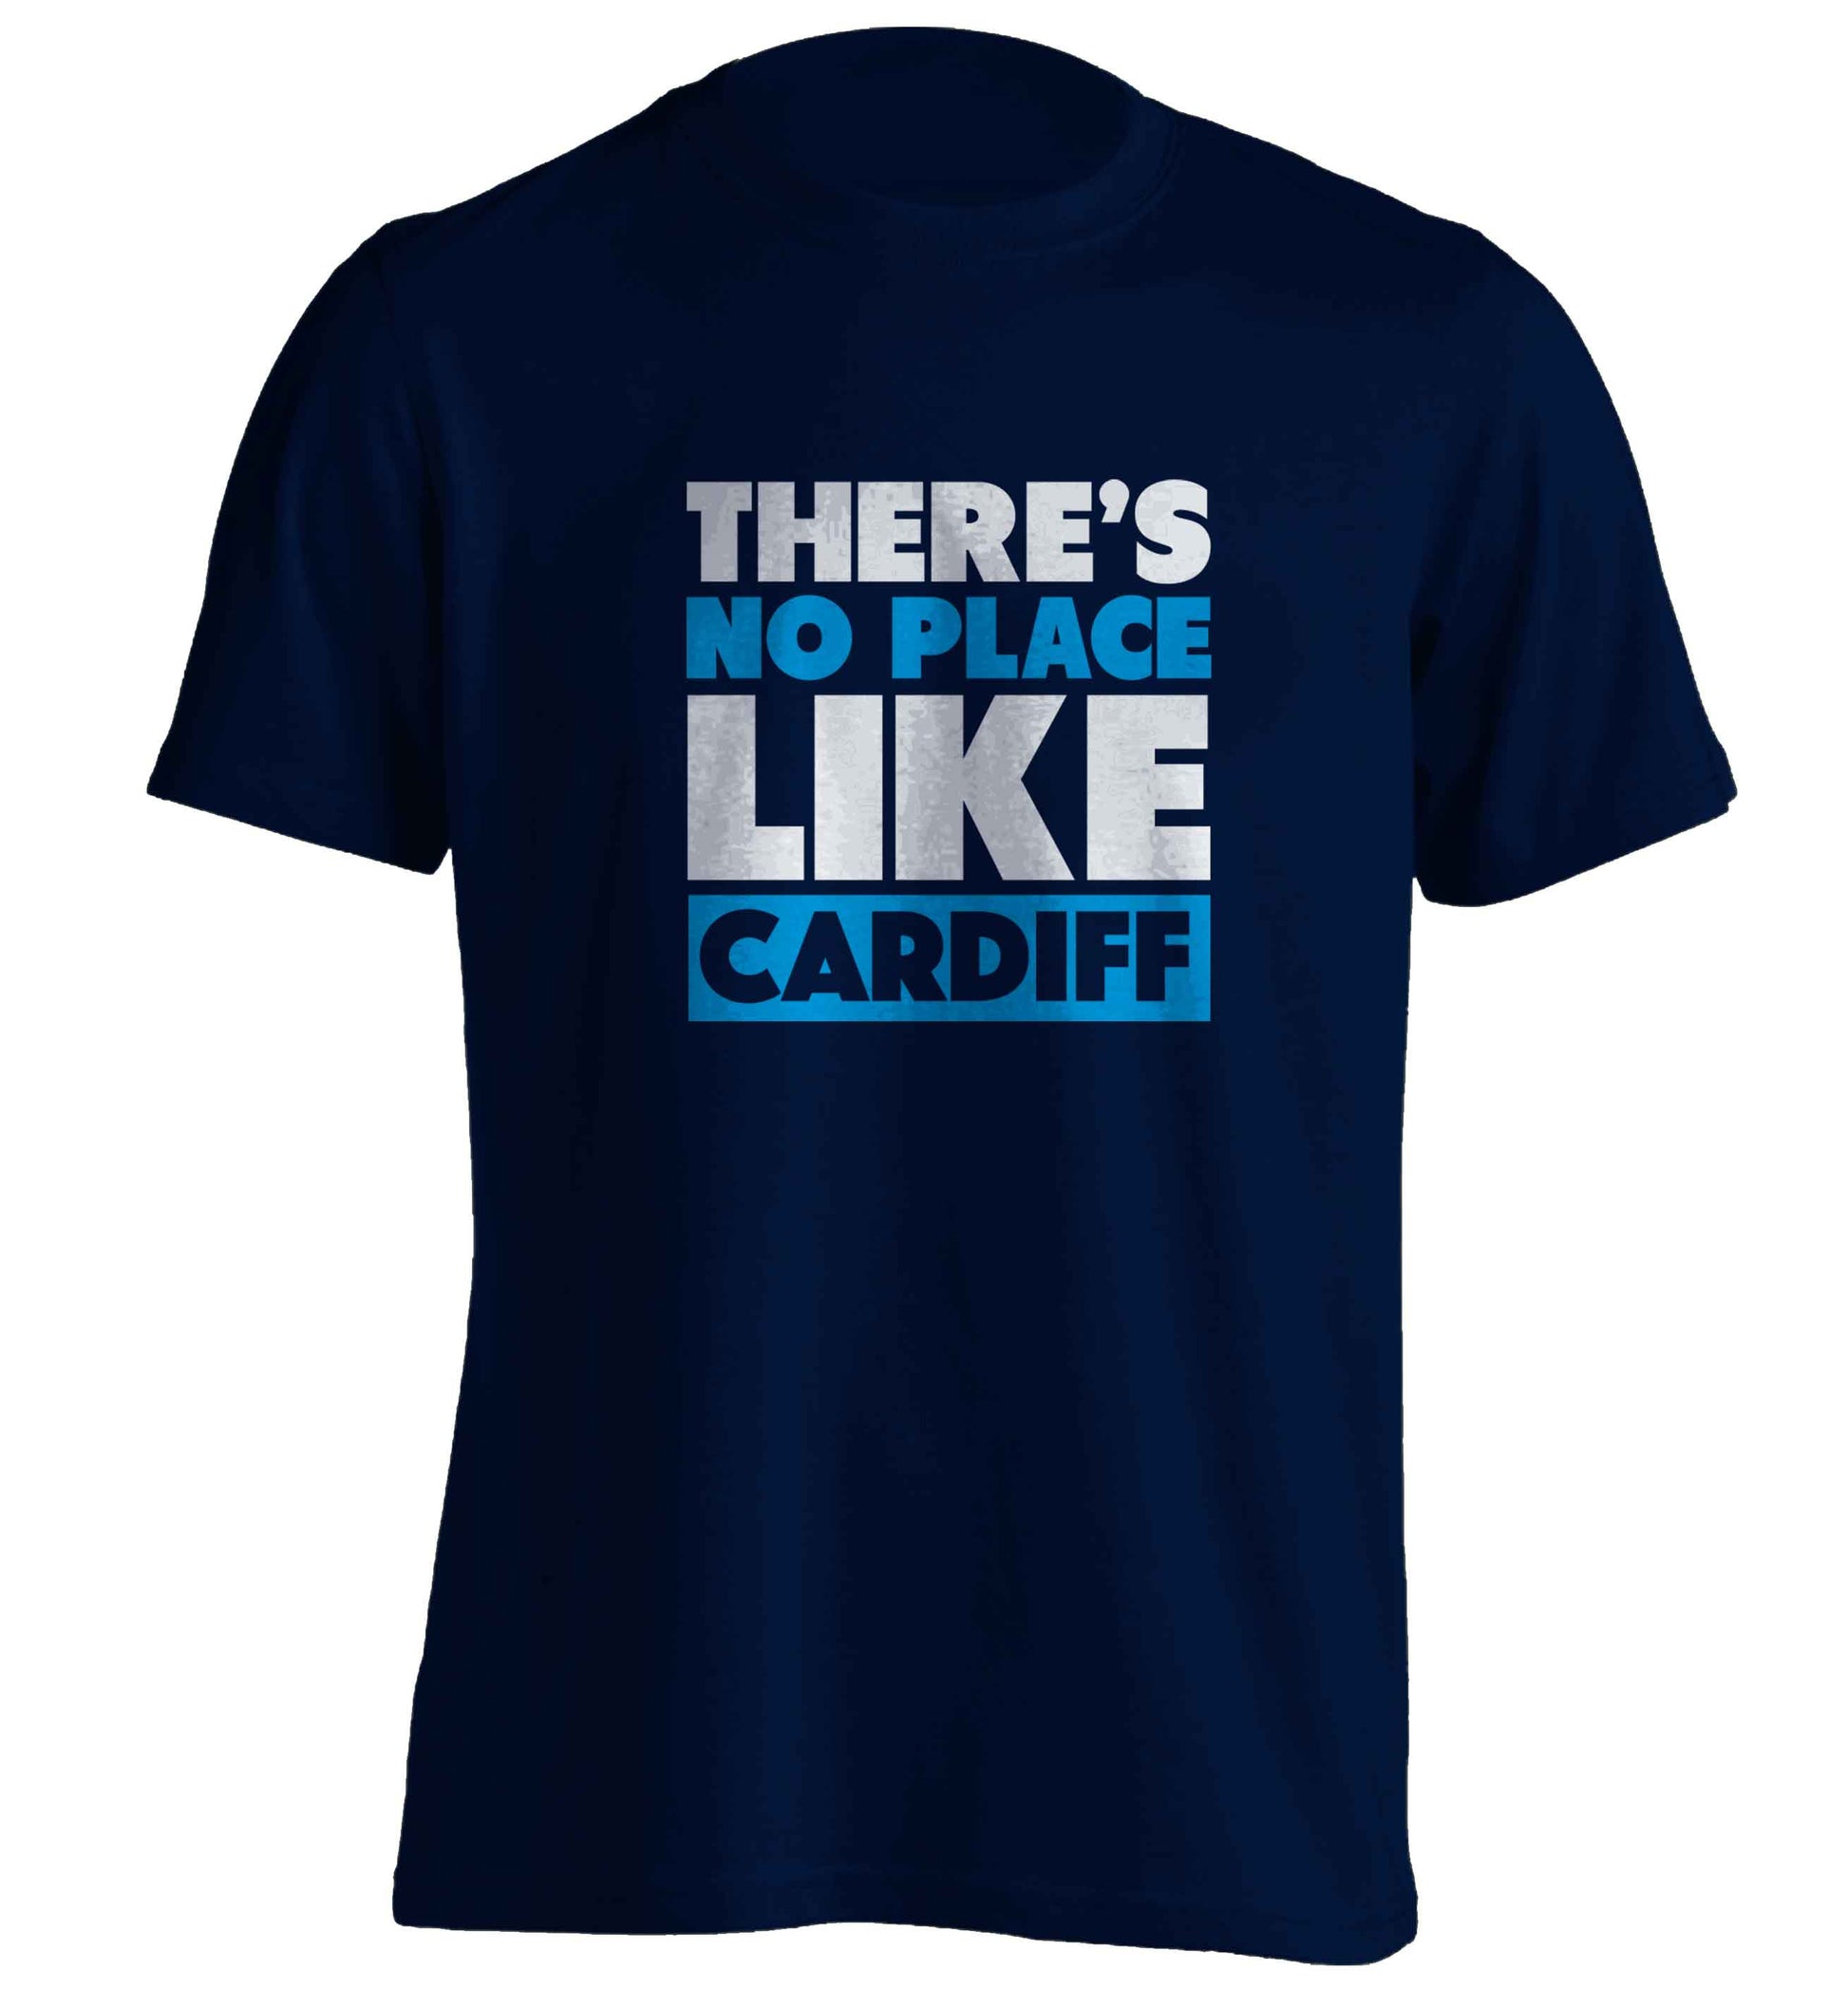 There's no place like Cardiff adults unisex navy Tshirt 2XL